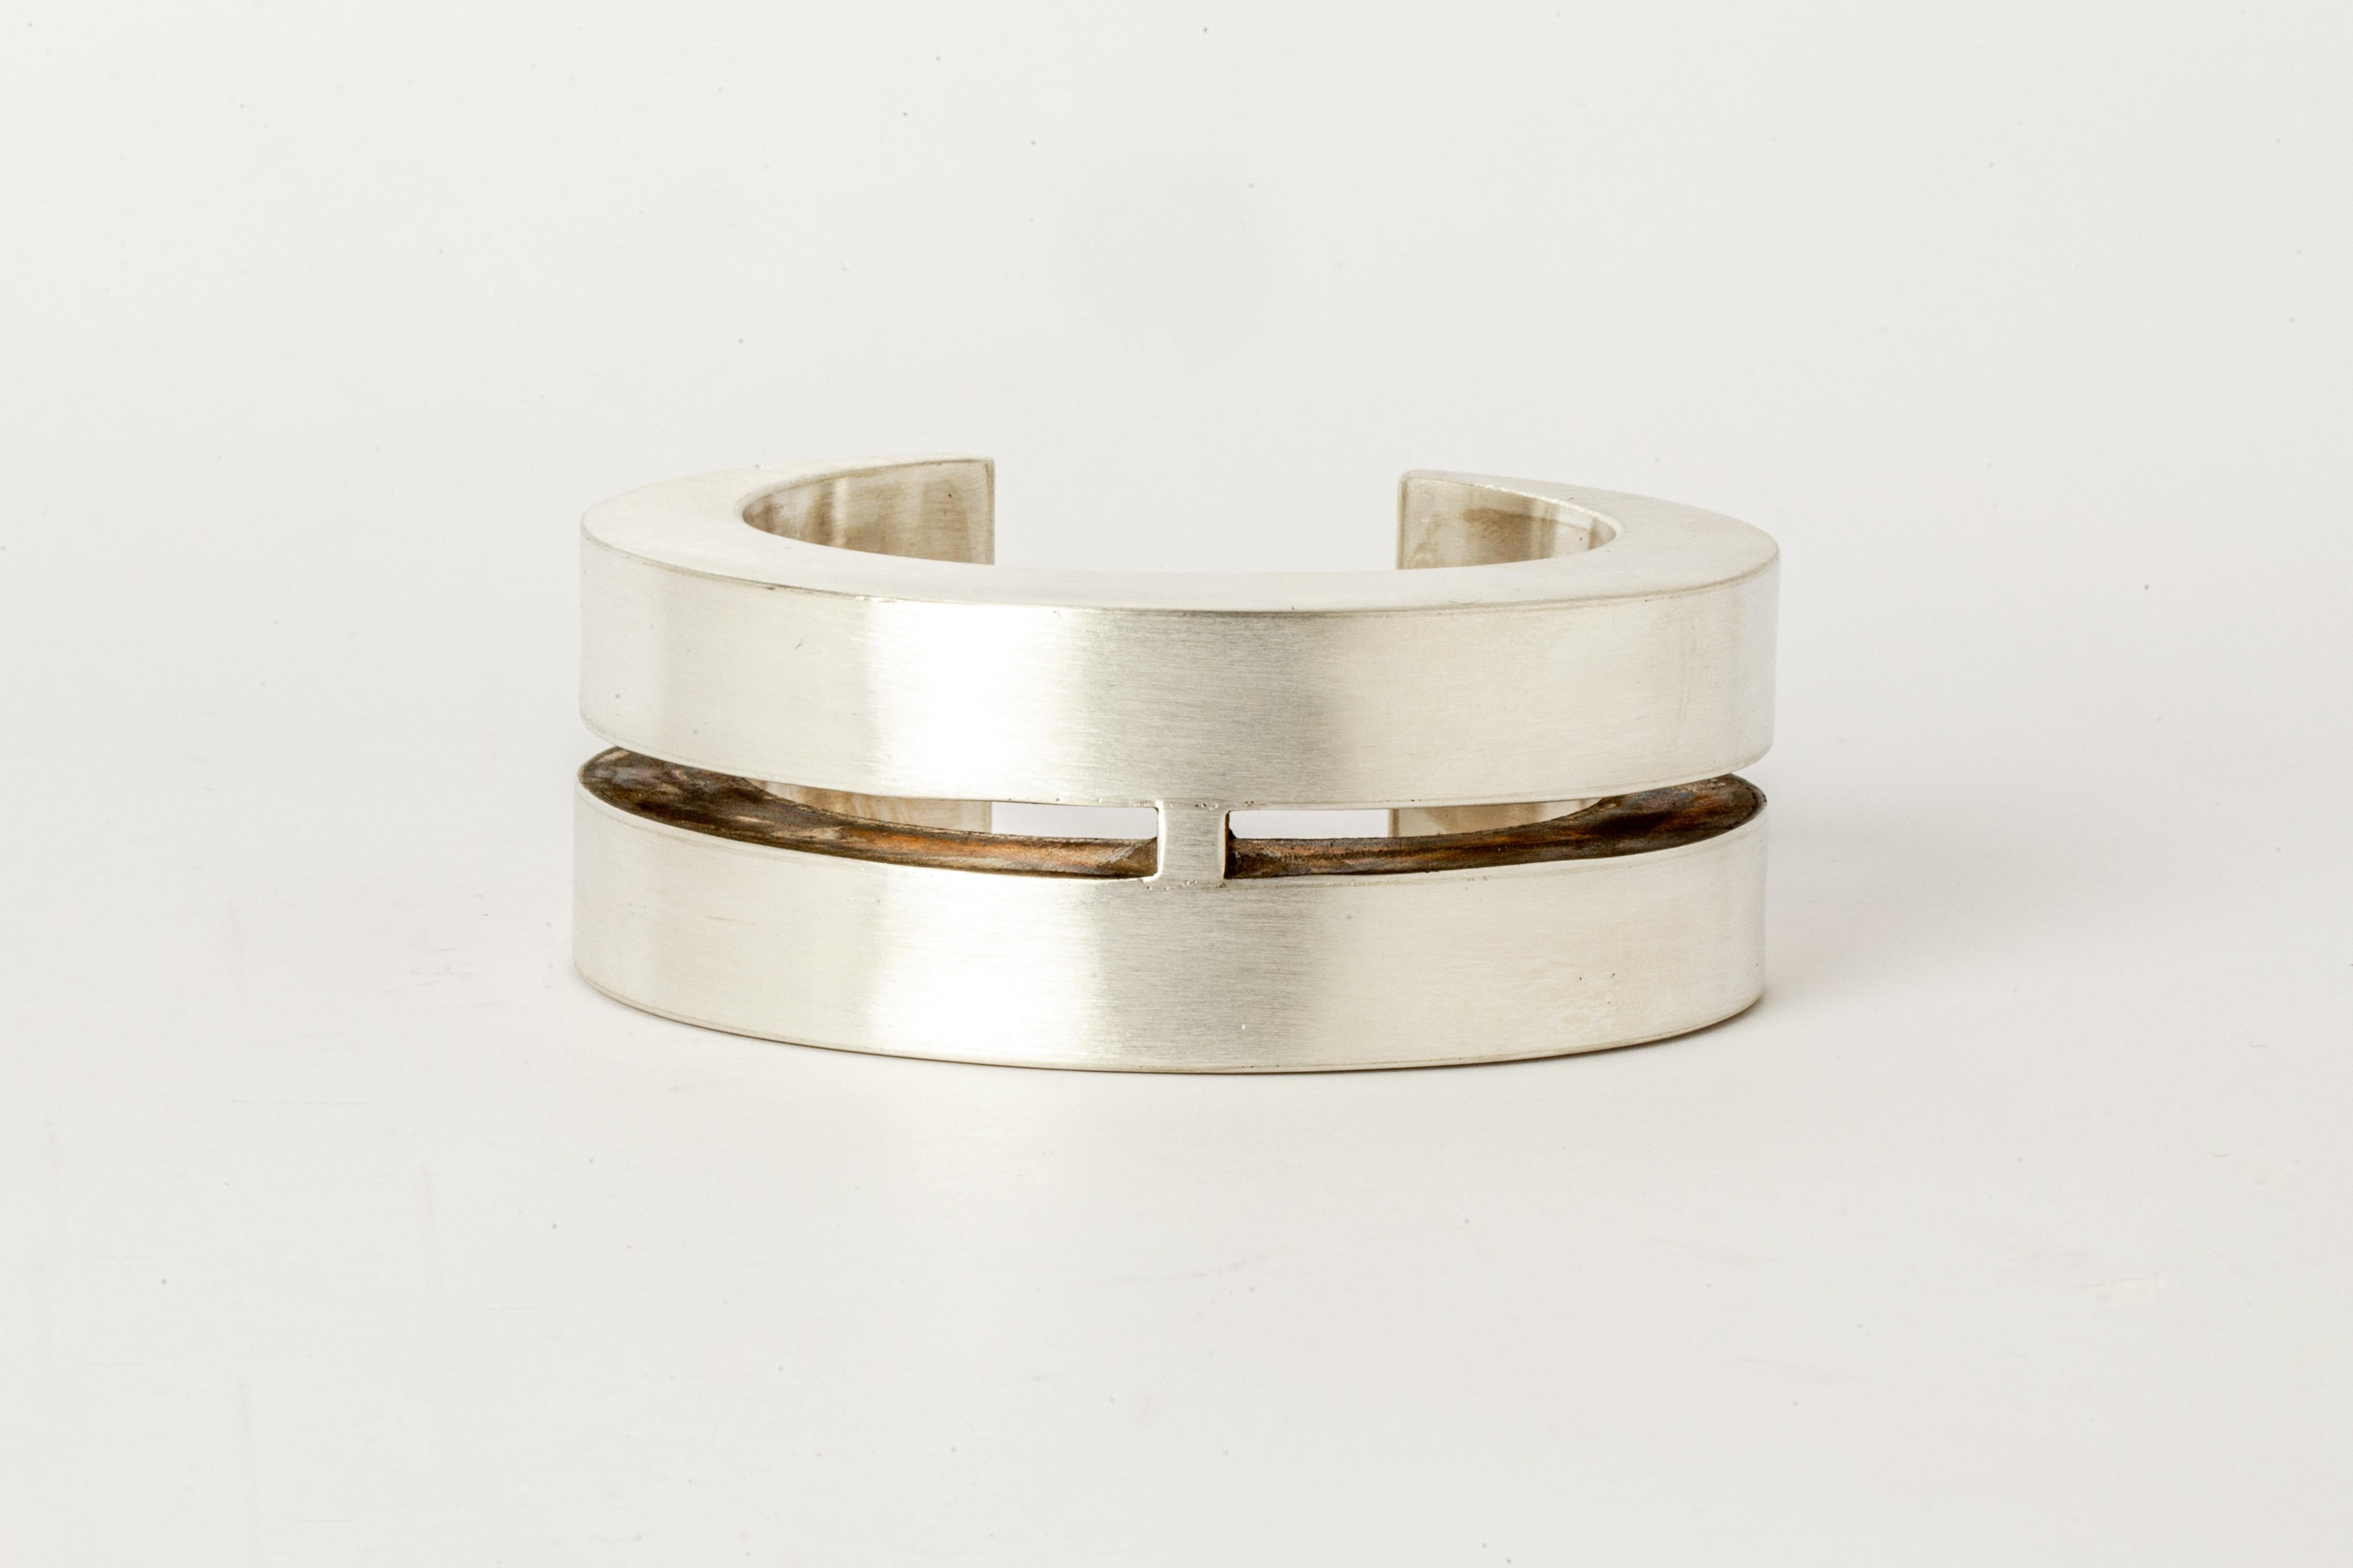 Crescent Crevice Bracelet (30mm, MA) In New Condition For Sale In Hong Kong, Hong Kong Island